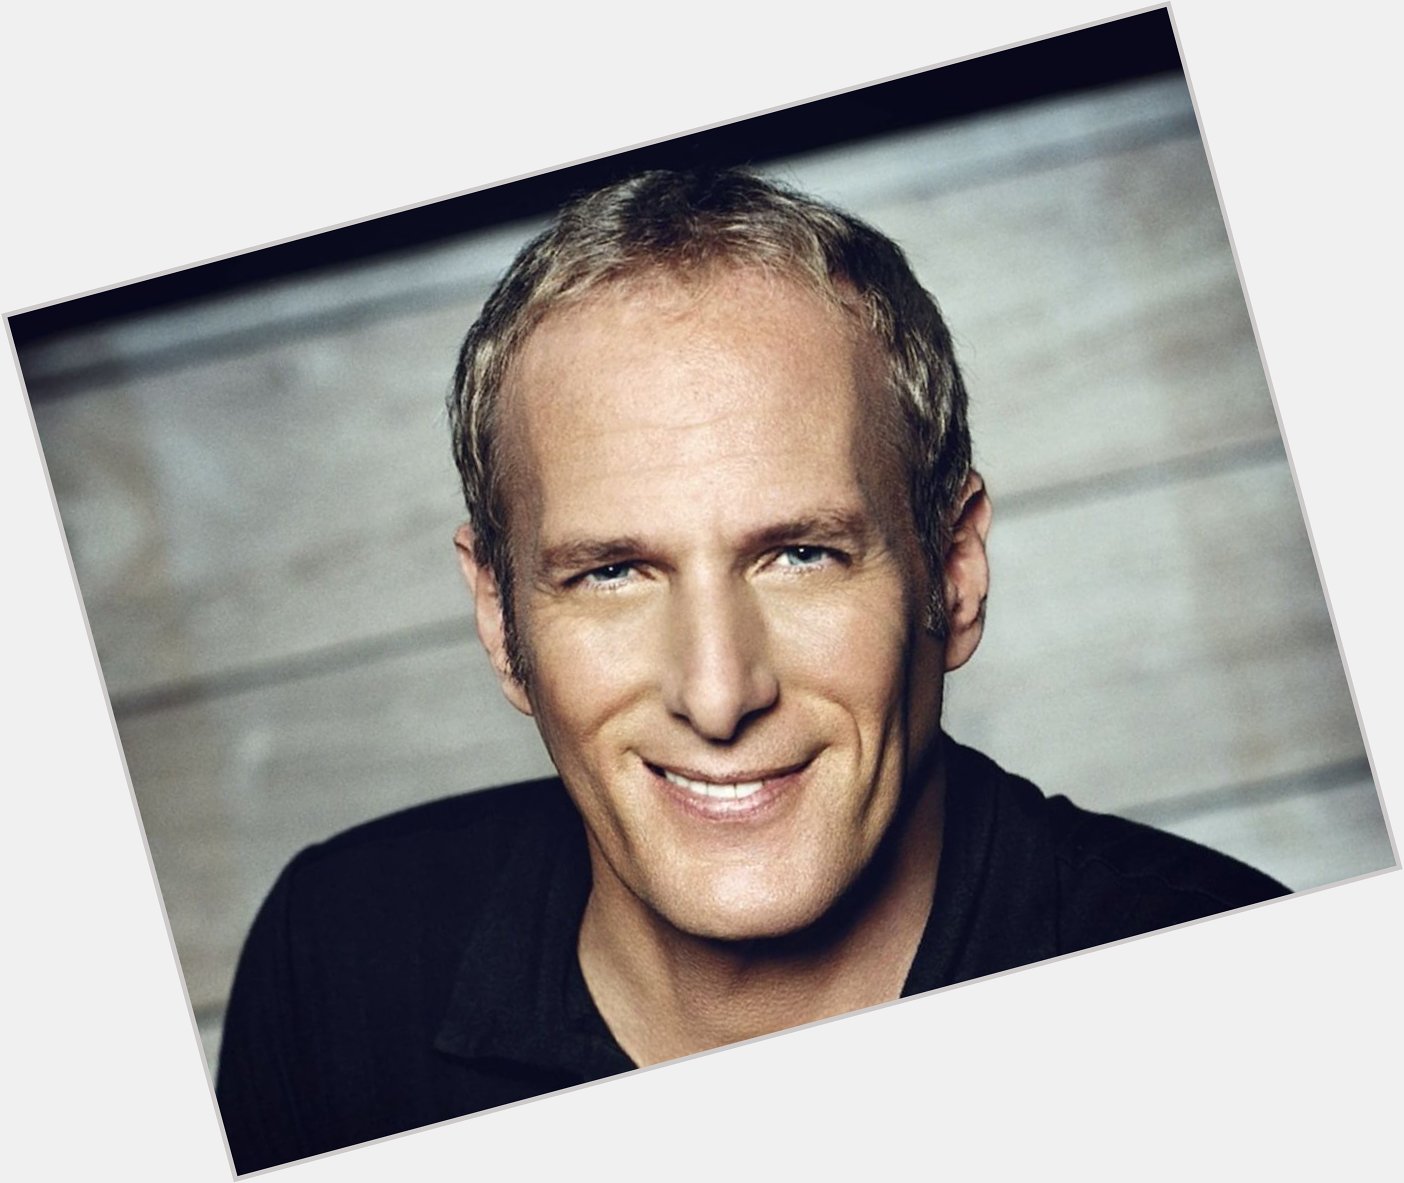 Happy birthday to the Grammy award winning singer Michael Bolton. Now playing How Am I Supposed to Live Without You. 